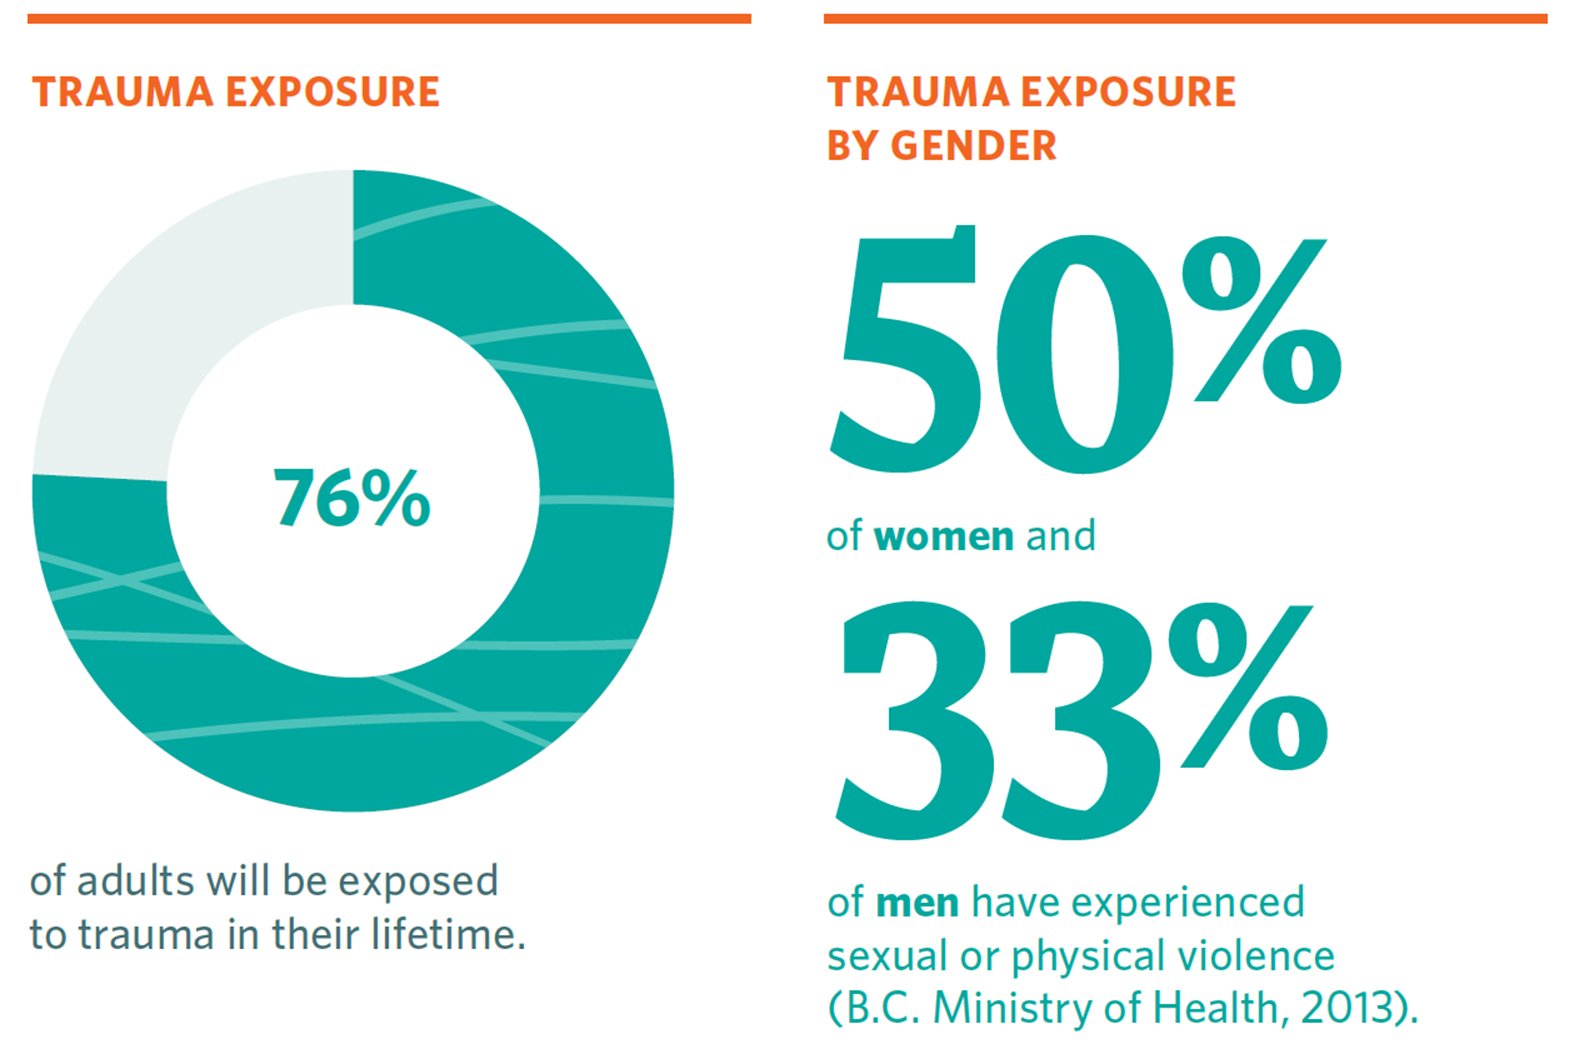 76% of adults will be exposed to trauma in their lifetime. 50% of women and 33% of men have experienced sexual or physical violence (B.C. Ministry of Health, 2013).